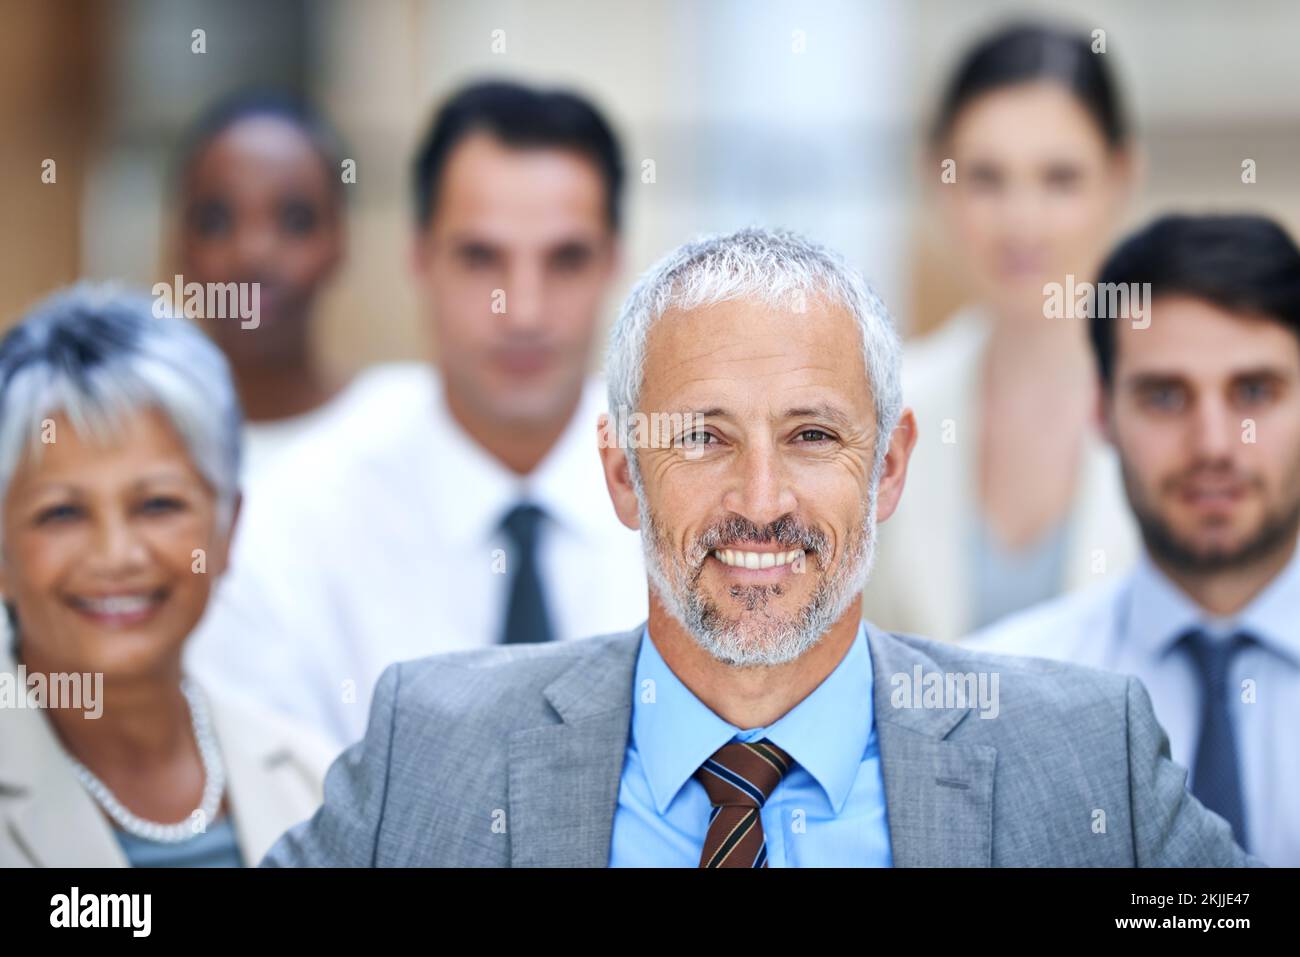 We never allow failure to stand in our way. Portrait of a smiling businessman surrounded by a group of his colleagues. Stock Photo